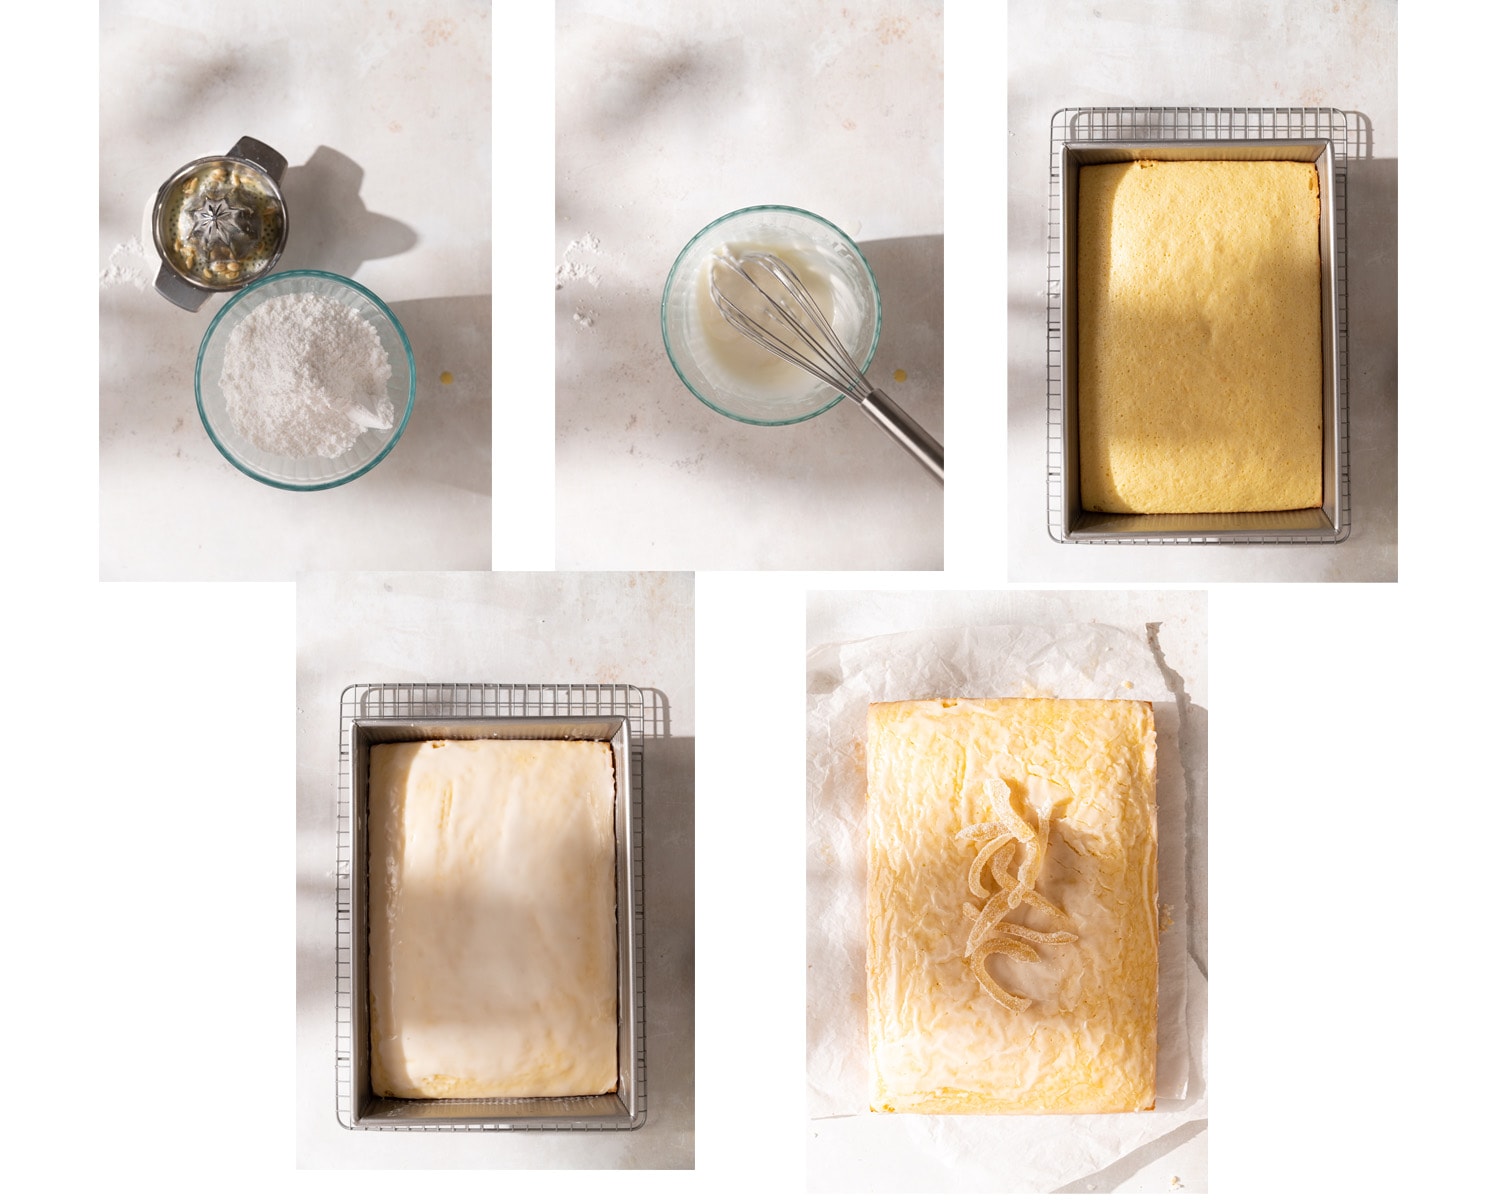 5 process images showing how to make the glaze and bake the zitronenkuchen.